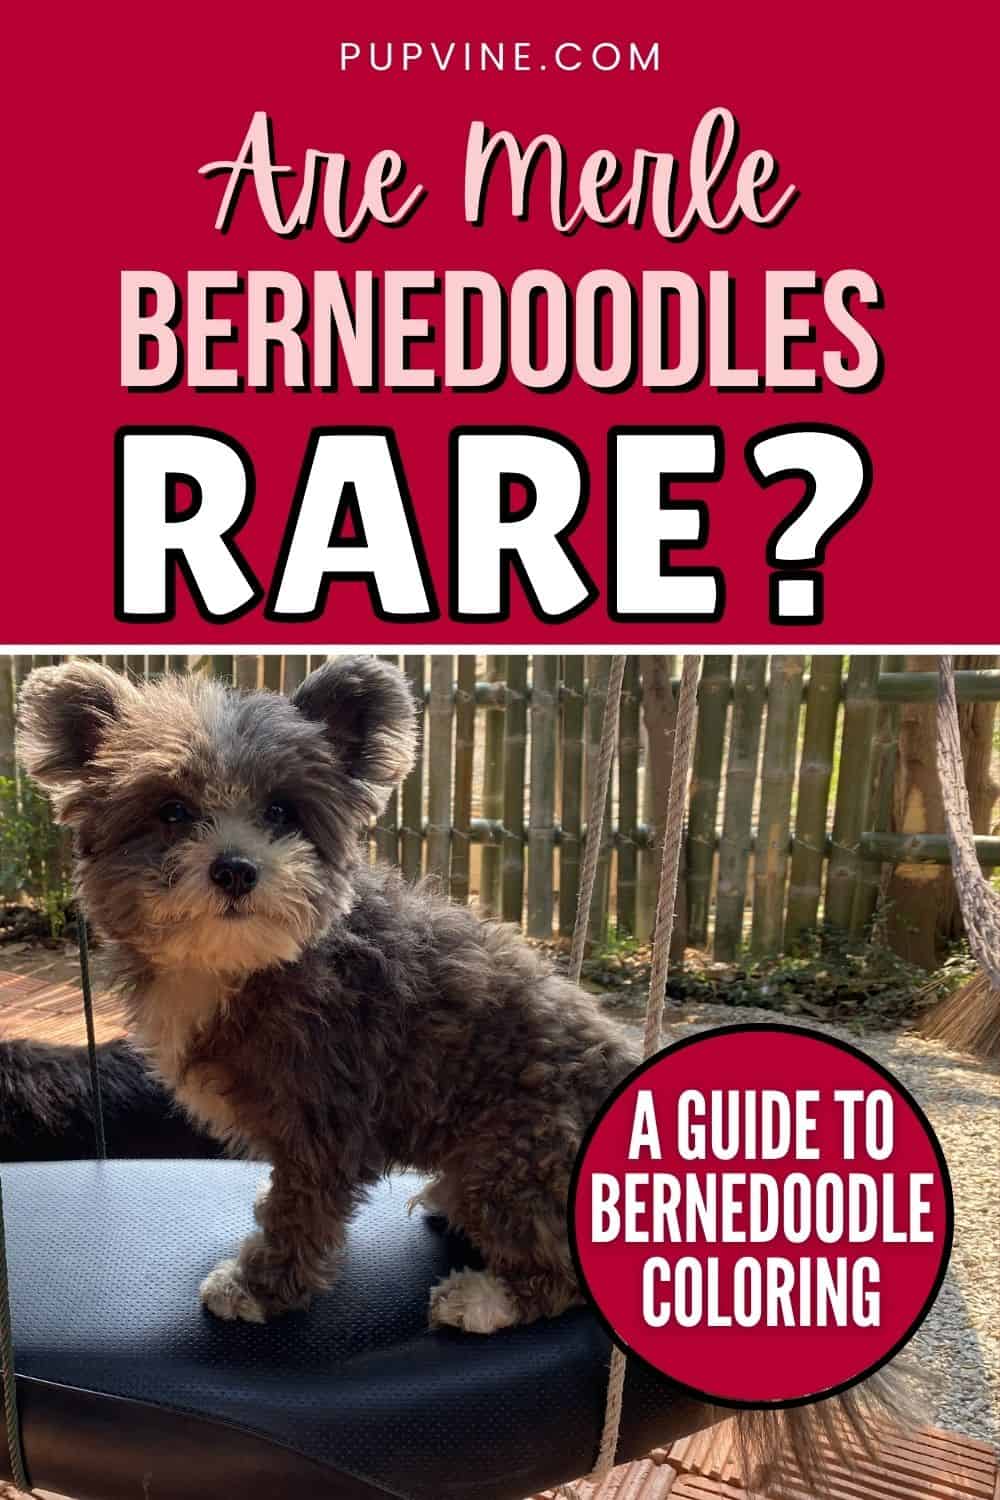 Are Merle Bernedoodles Rare? A Guide To Bernedoodle Coloring